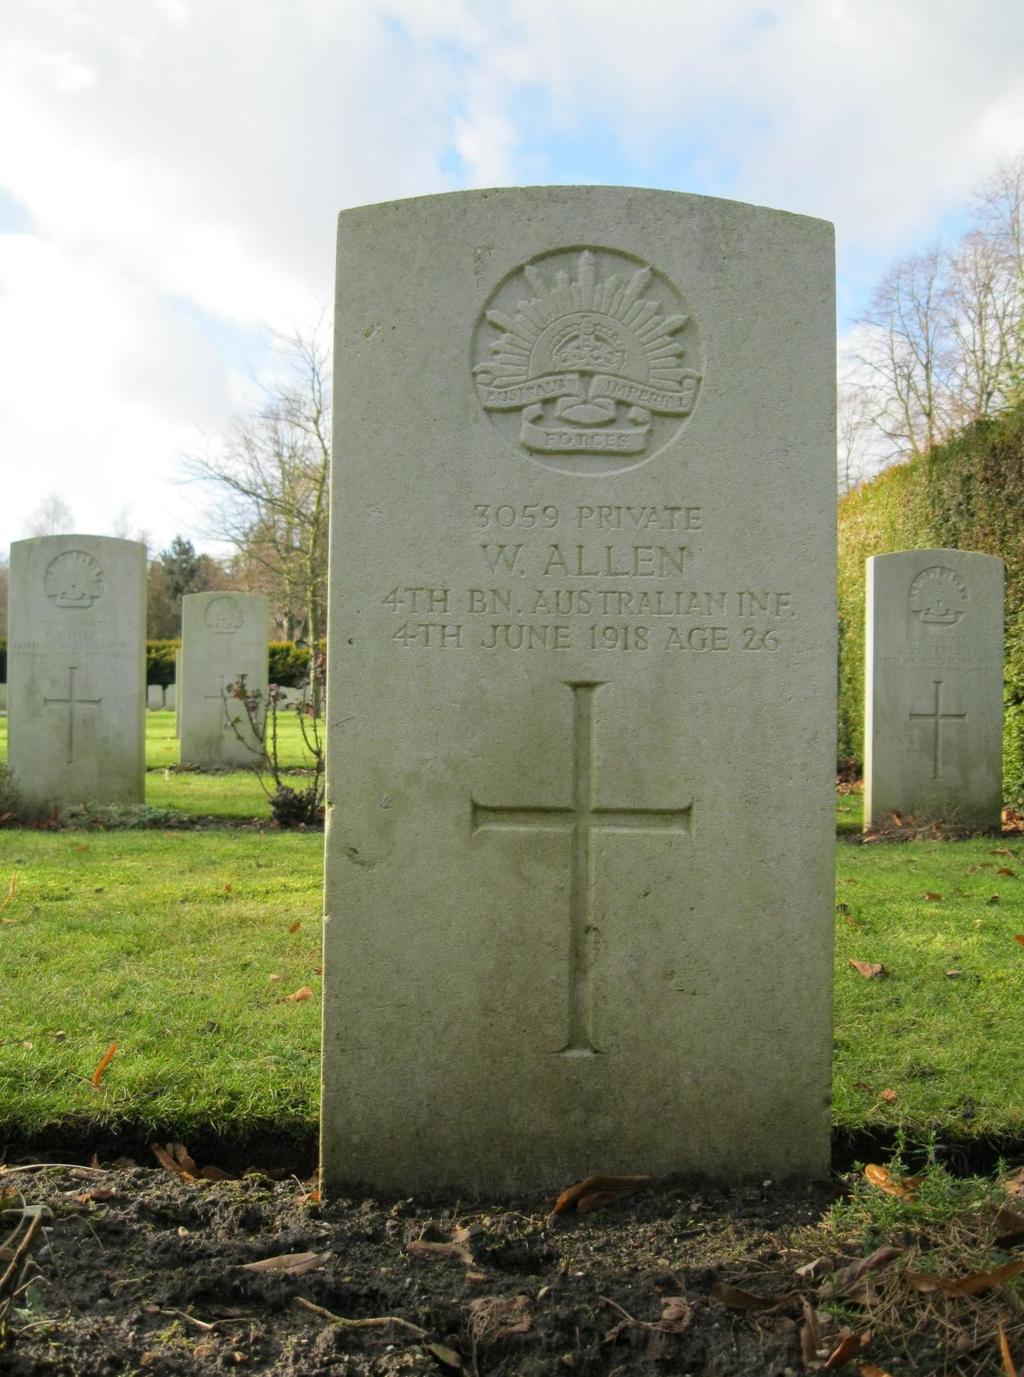 Photo of Private W. Allen s Commonwealth War Graves Commission Headstone in Earlham Road Cemetery, Norwich, Norfolk, England.